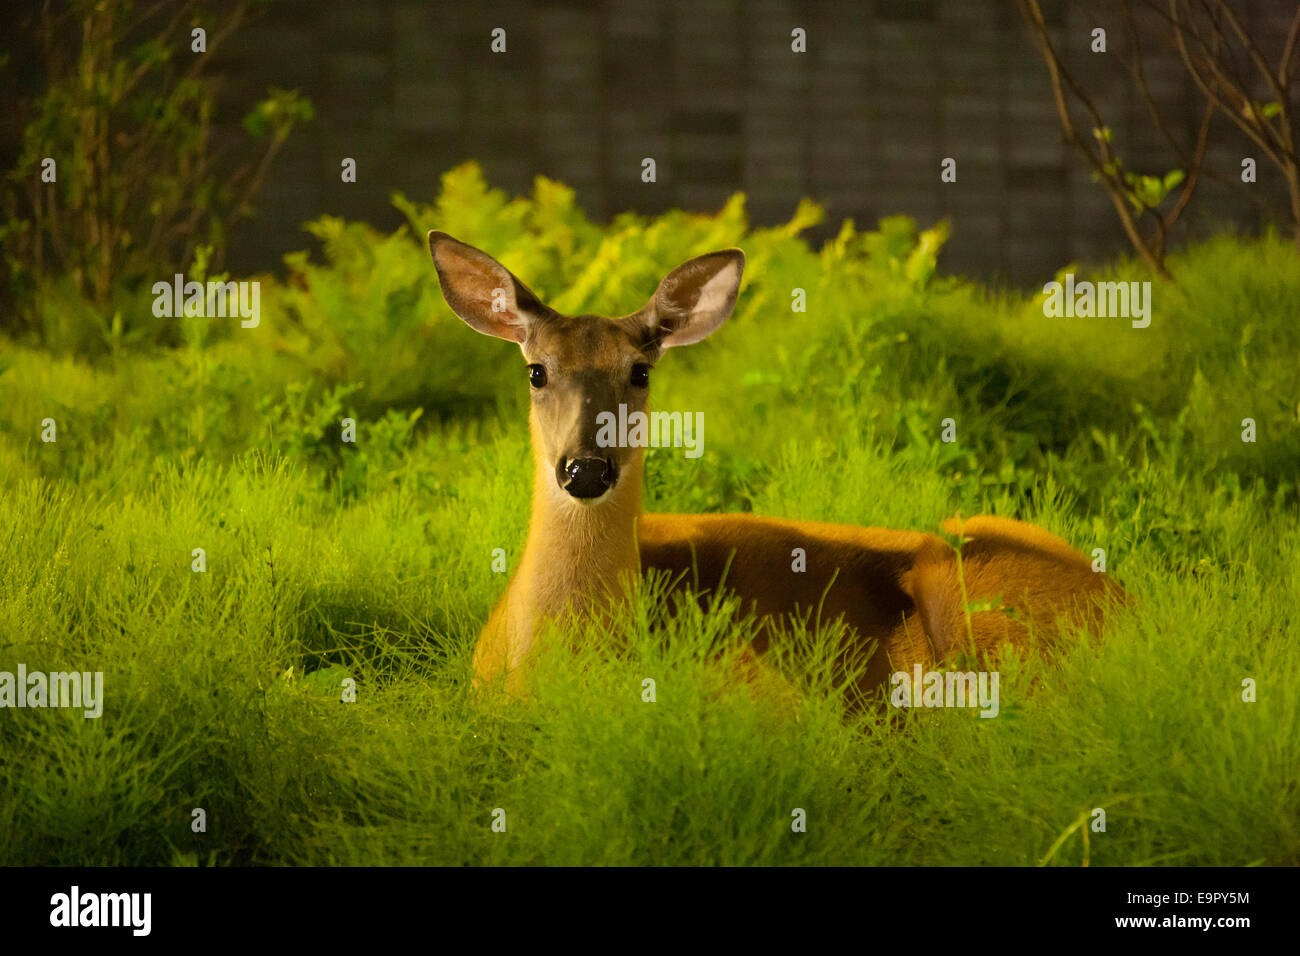 A White-Tailed Deer (Odocoileus virginianus) sitting down in a grassy field. Mississauga, Ontario, Canada. Stock Photo